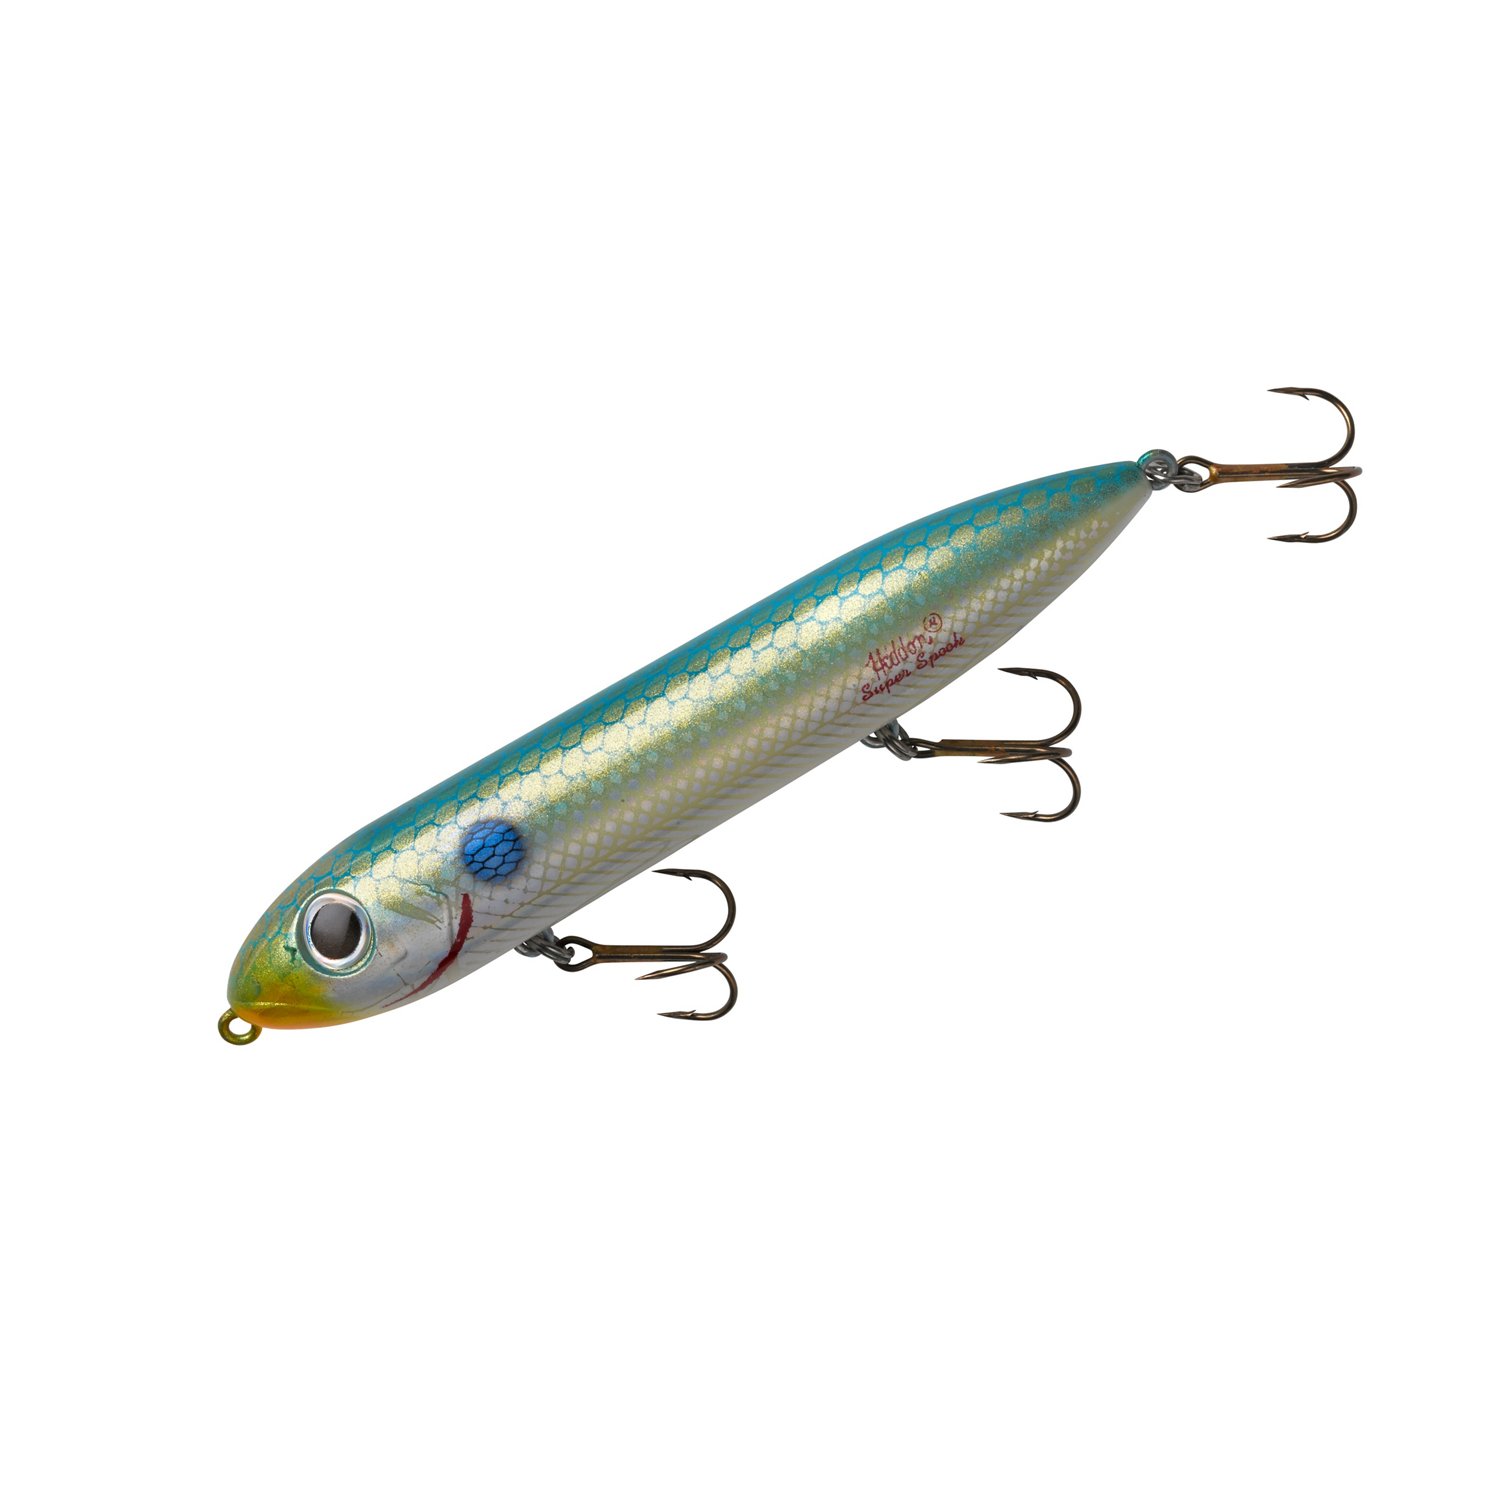 Heddon Super Spook Topwater Fishing Lure for Saltwater and Freshwater,  Clear, Super Spook (7/8 oz)